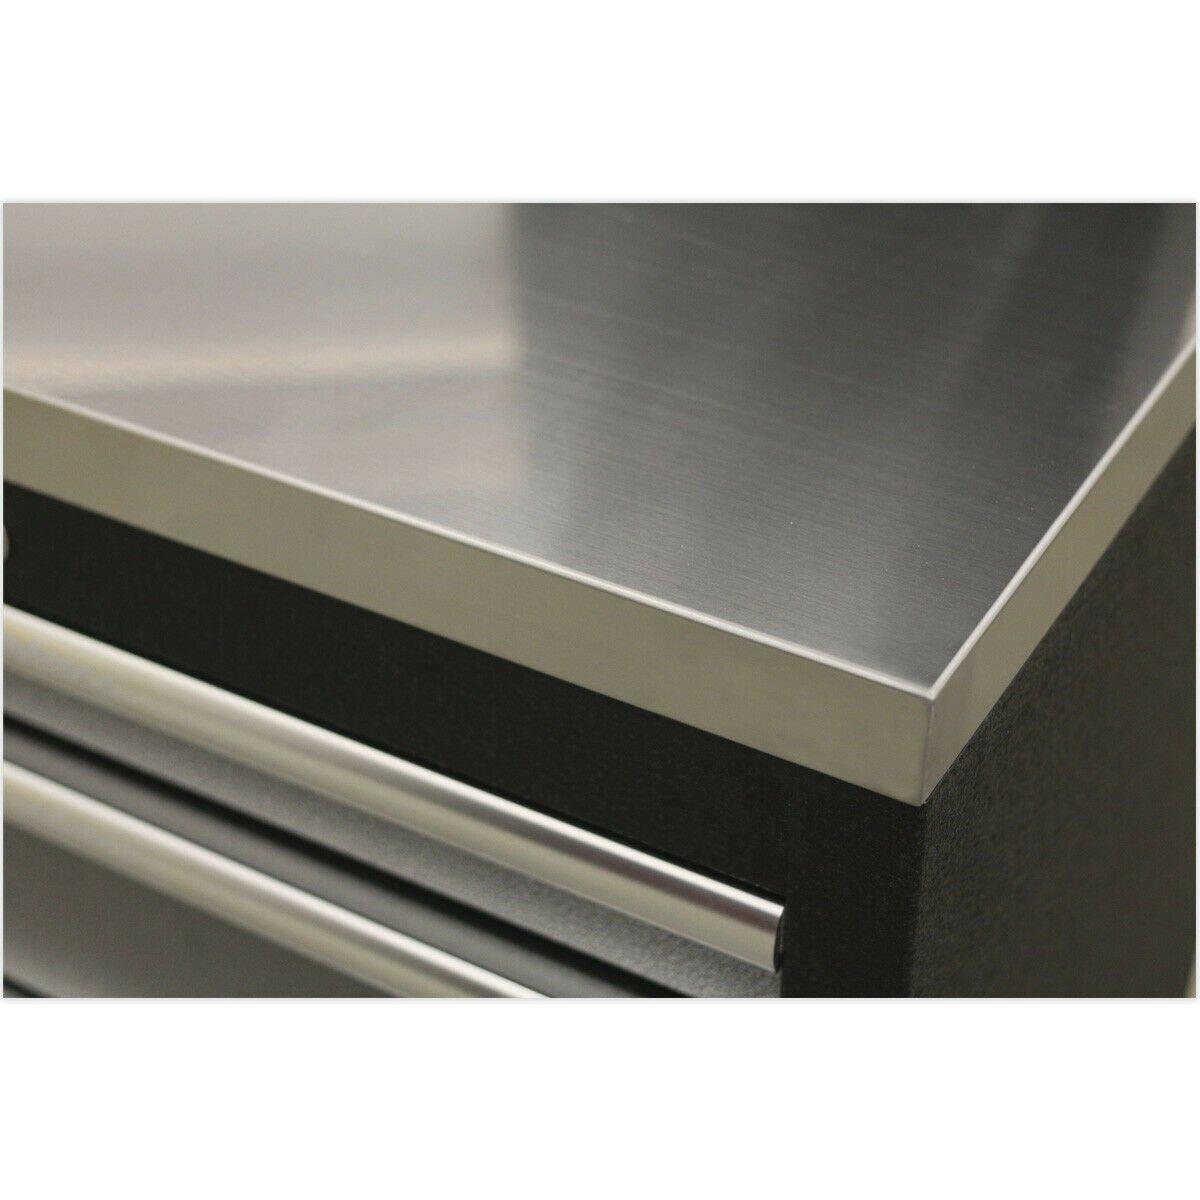 2040mm Stainless Steel Worktop for ys02633 ys02634 ys02639 & ys02641 Cabinets